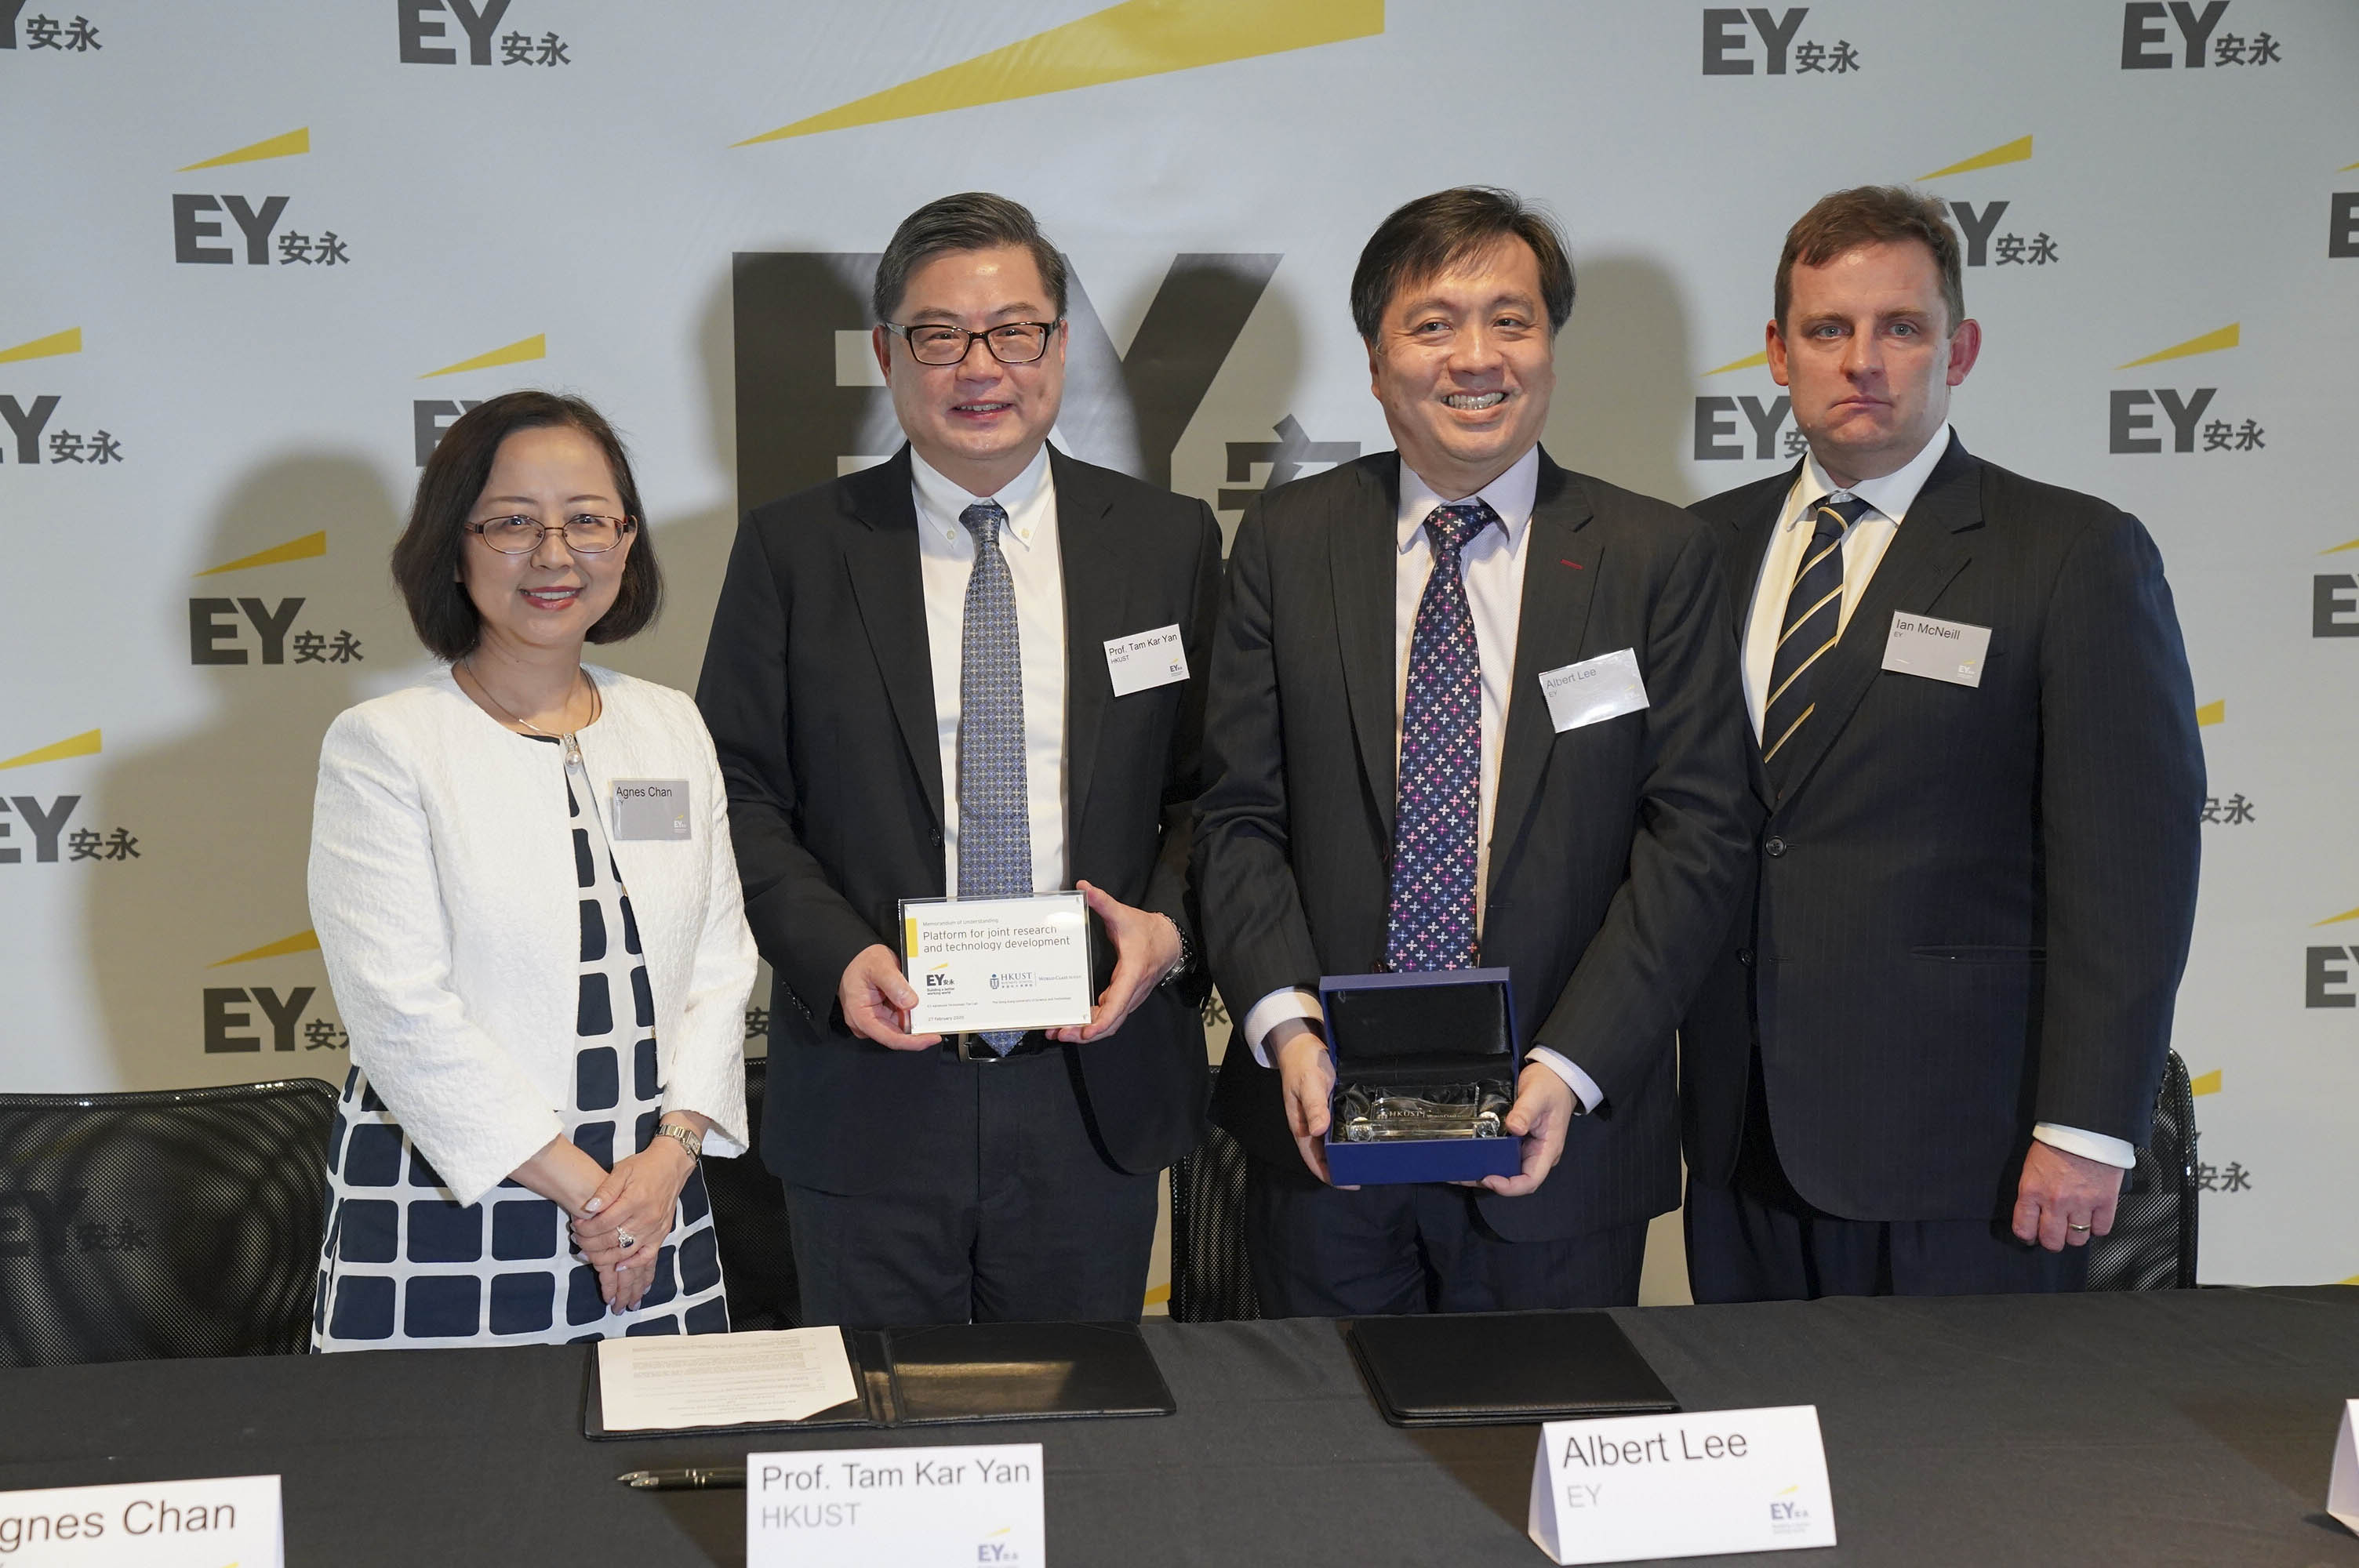 (From left) Agnes CHAN, EY Managing Partner - Hong Kong & Macau; Prof. TAM Kar Yan, Dean of HKUST Business School; Albert LEE, EY Global Tax Technology and Transformation Co-Leader and Asia-Pacific Tax Technology and Transformation Leader; and Ian MCNEILL, EY Asia Pacific Tax Deputy Leader 